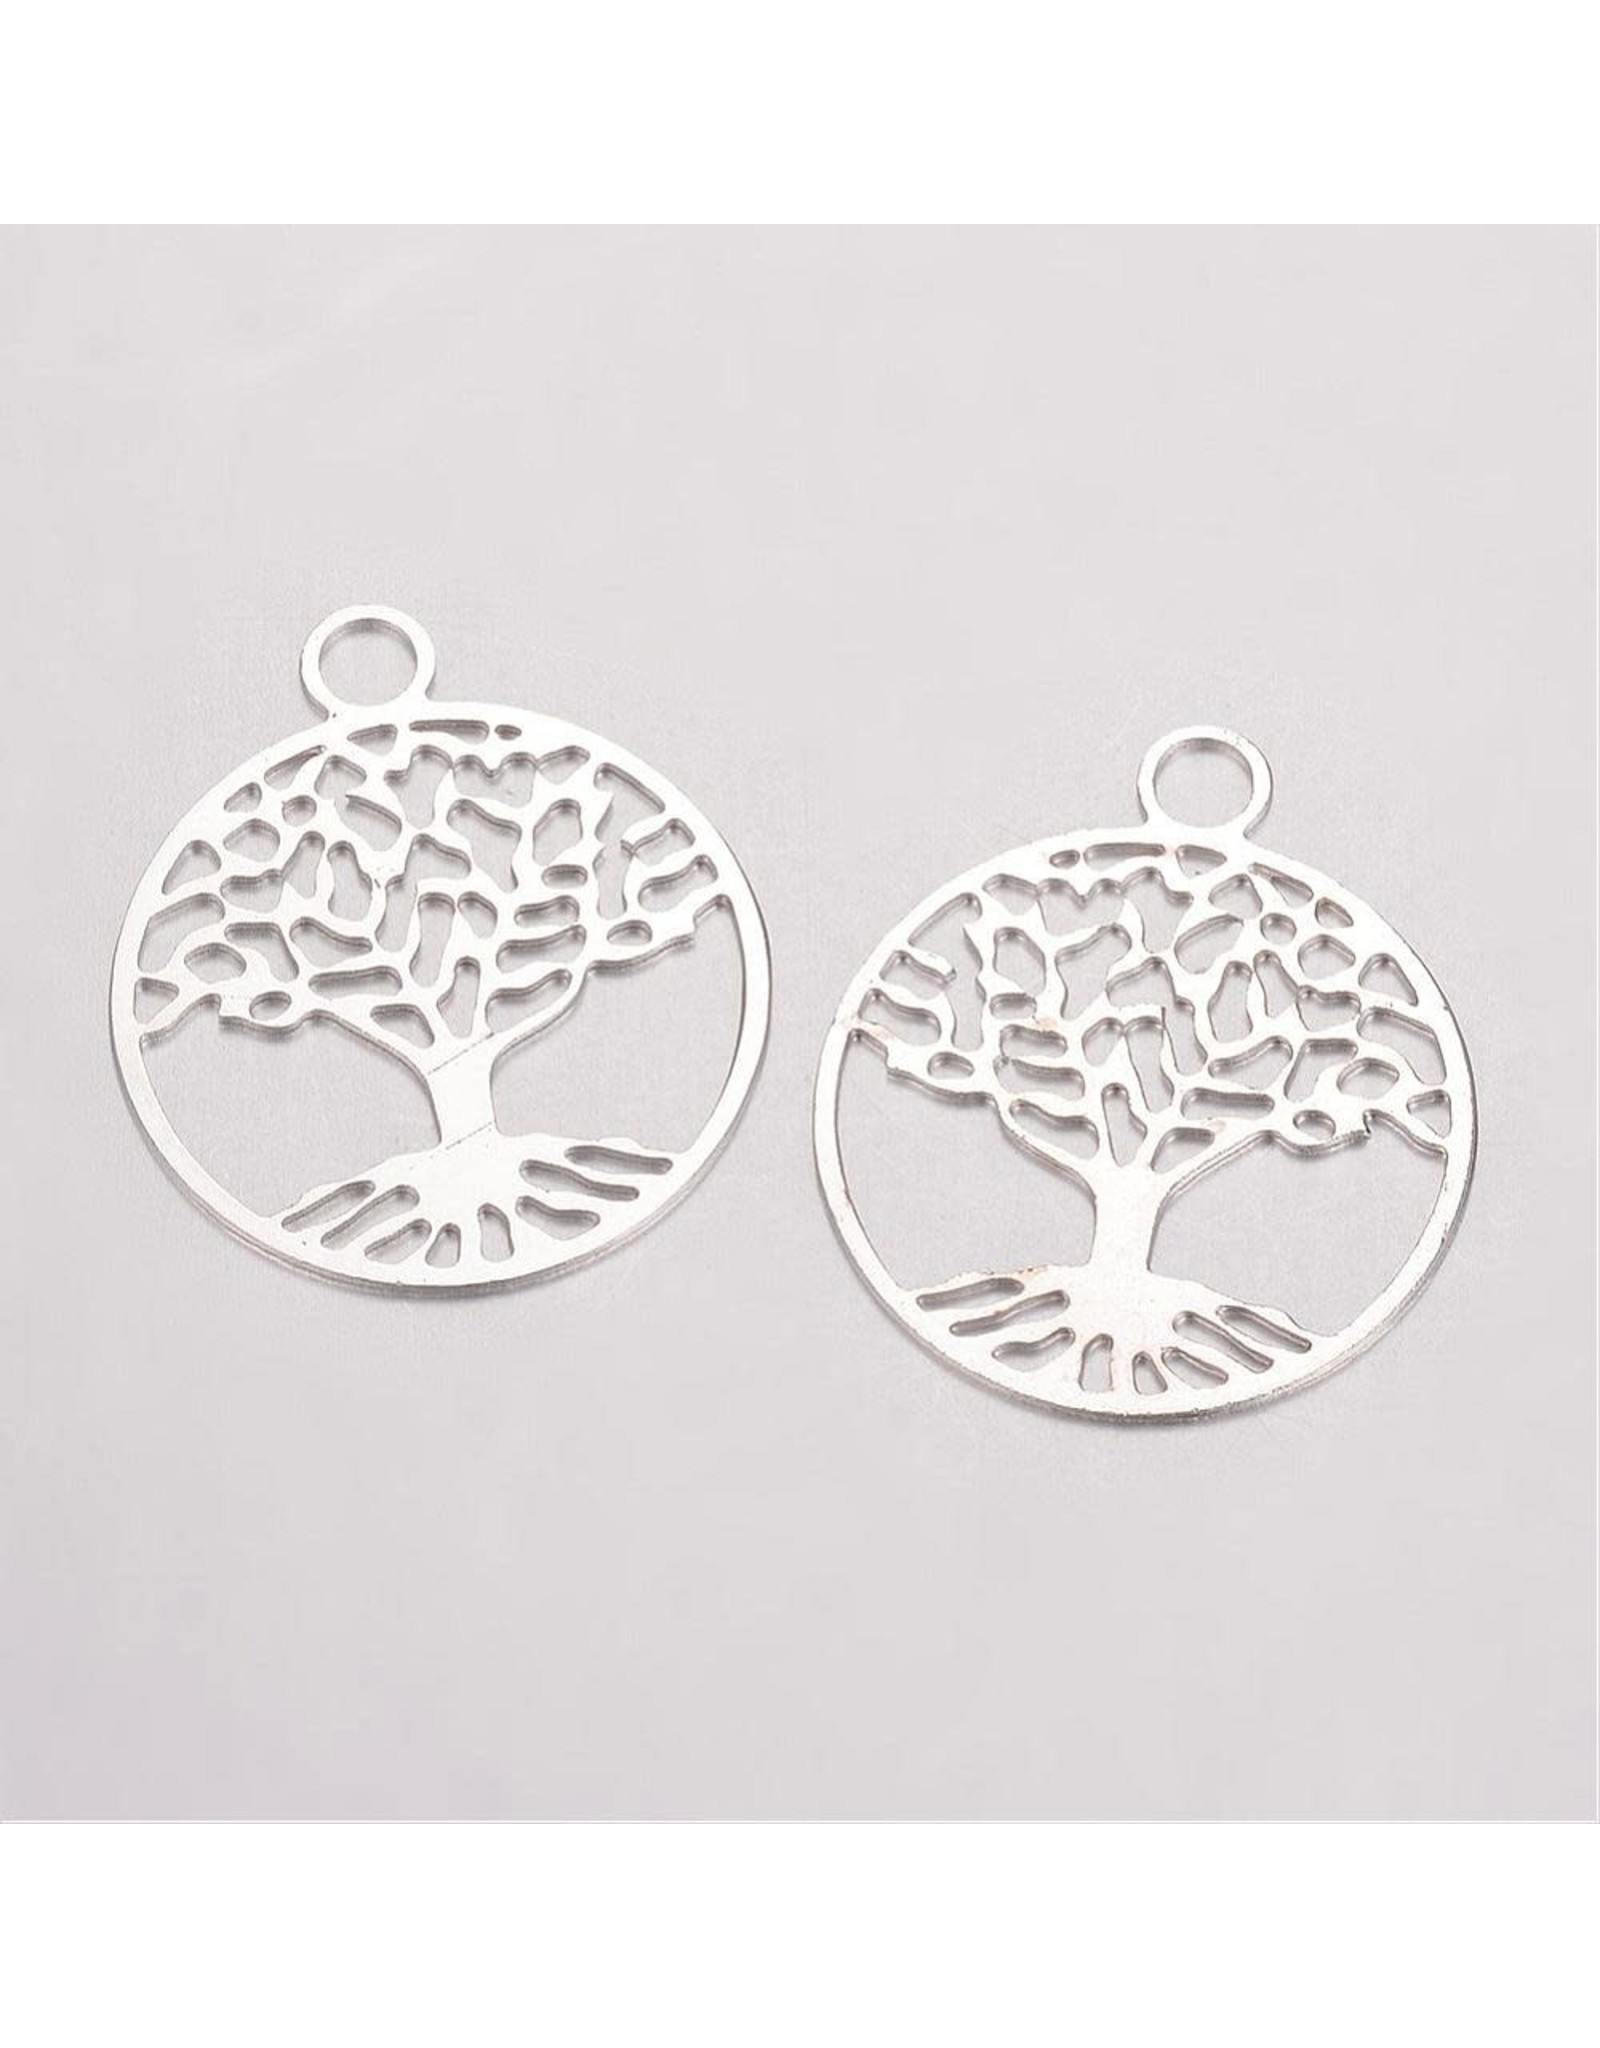 Tree of Life  24x20mm  Silver   NF  x5